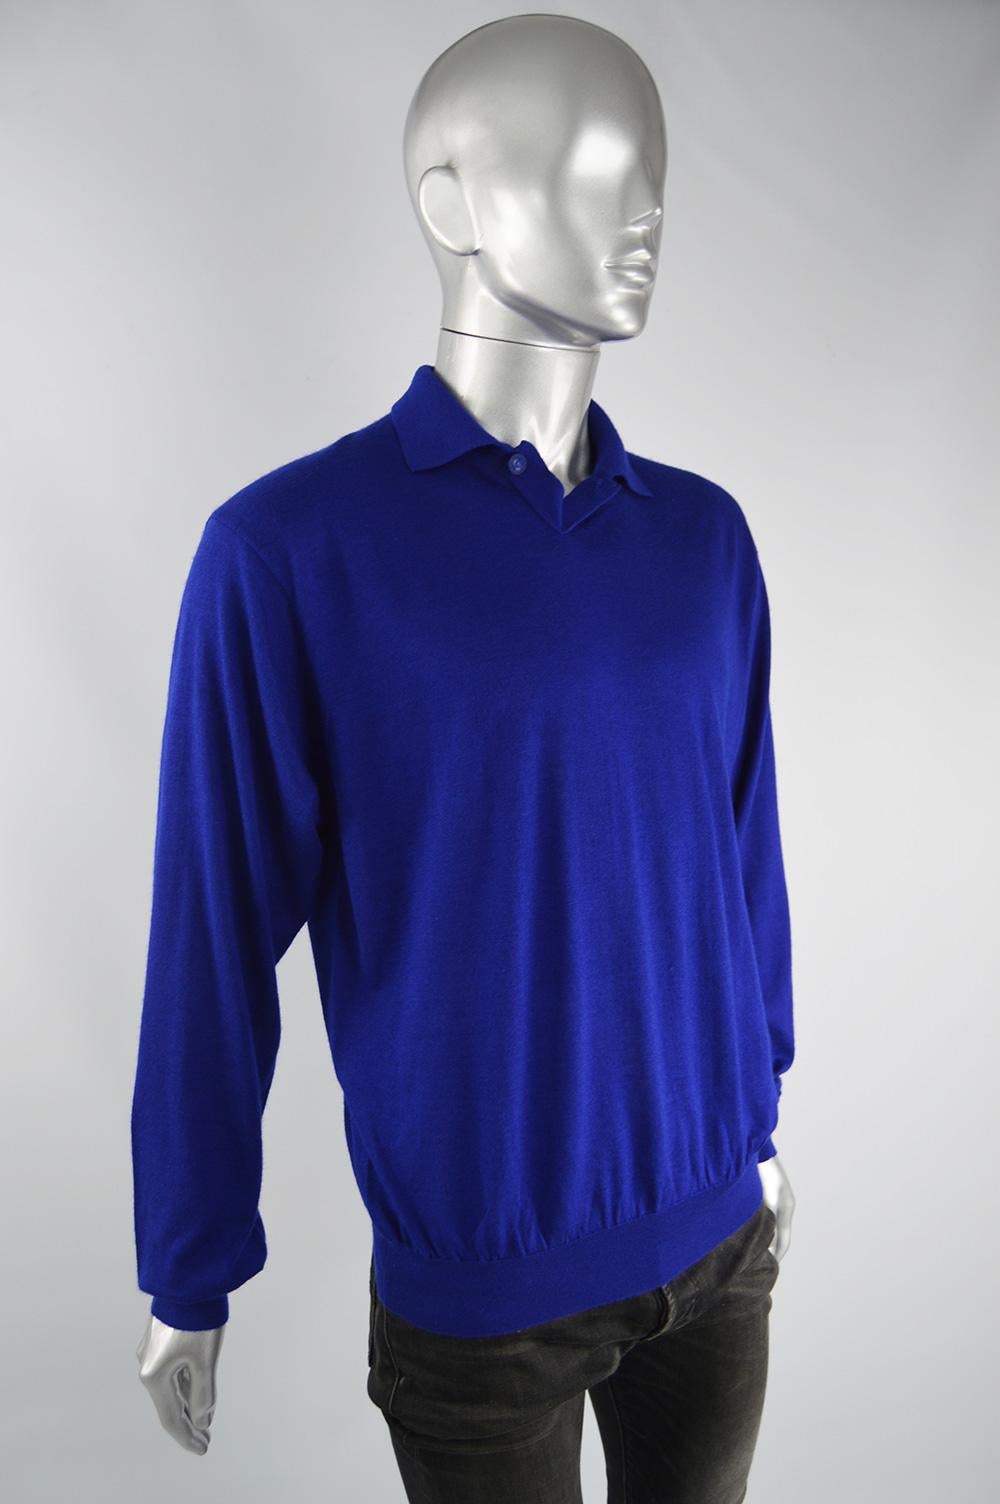 Gianni Versace Mens Cashmere & Silk Royal Blue Vintage Collared Sweater, 1990s  In Good Condition For Sale In Doncaster, South Yorkshire